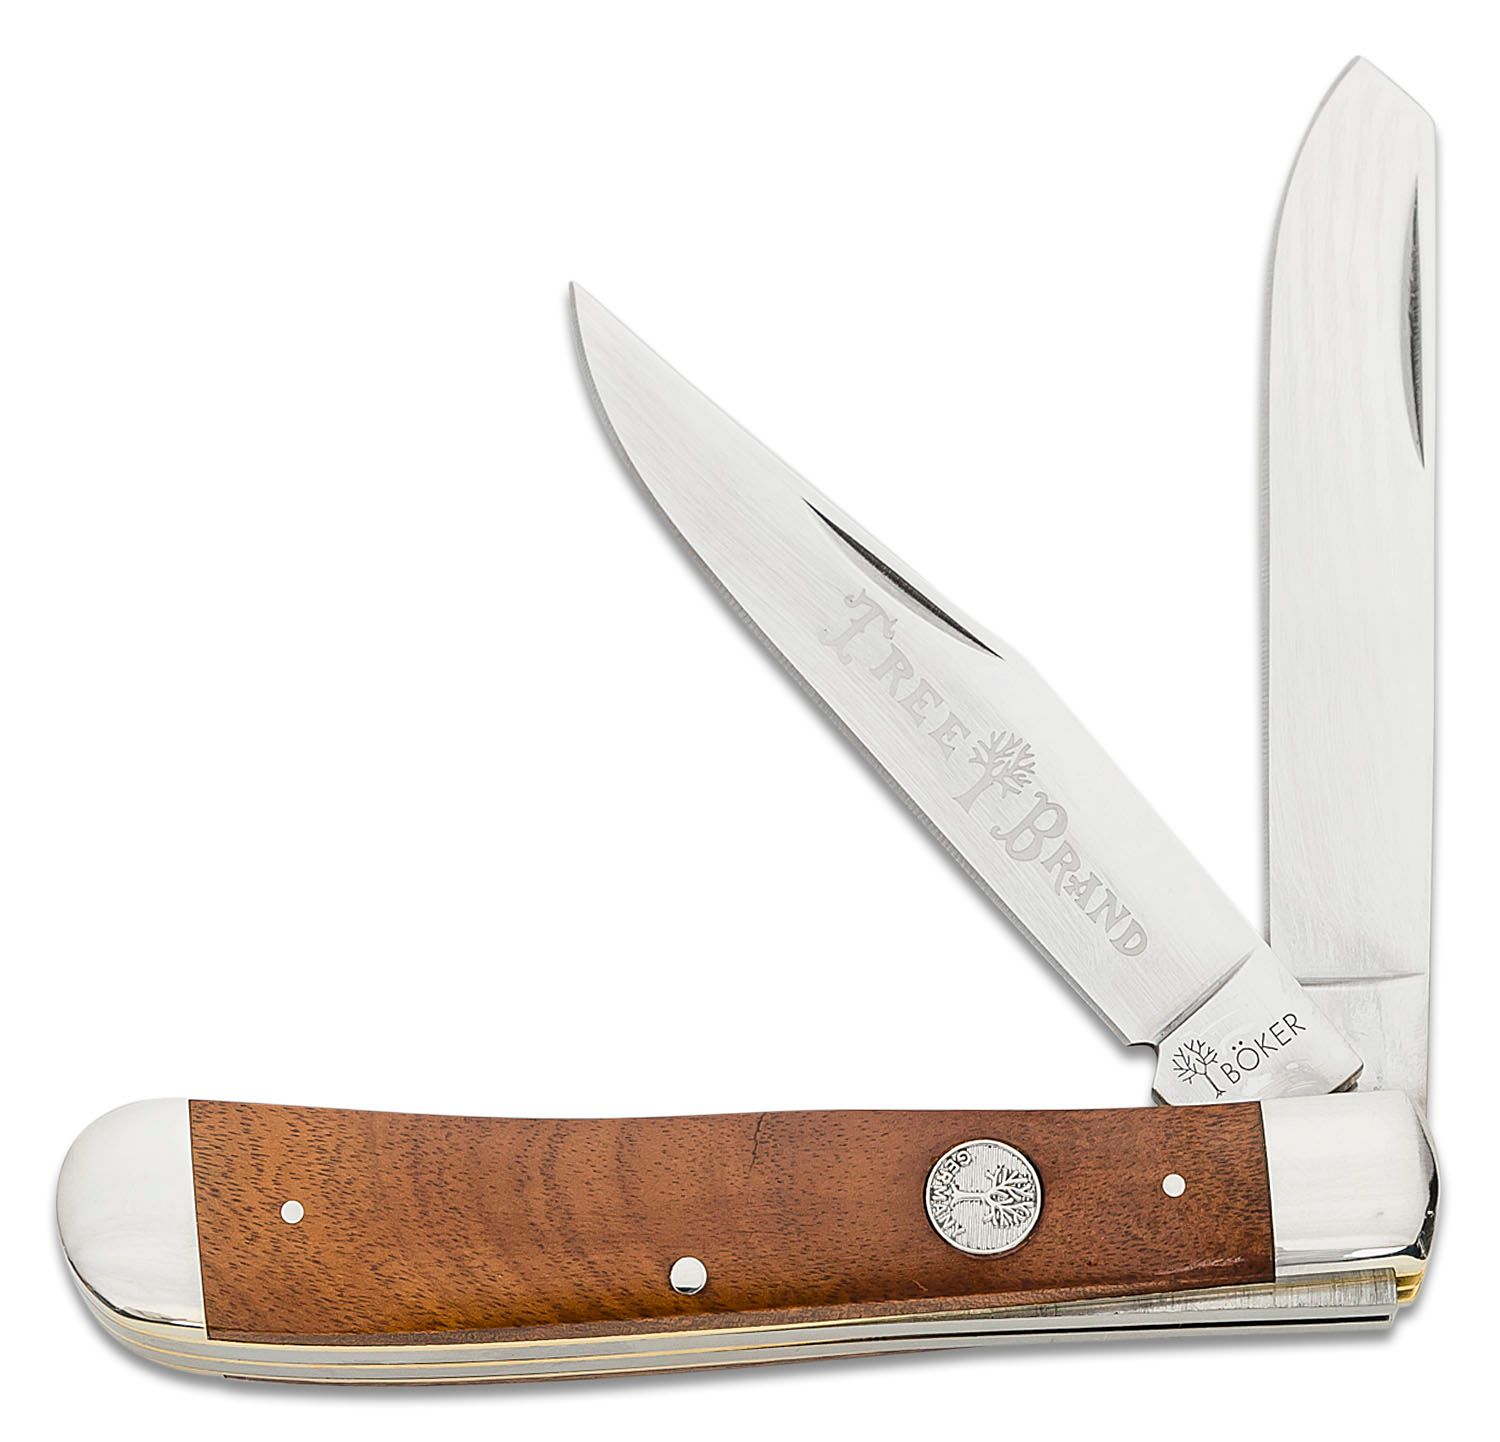 Boker Traditional Series 2.0 Trapper, Smooth Rosewood Handles with Nickel  Silver Bolsters, D2 Blade 4.25 Closed - KnifeCenter - 110832